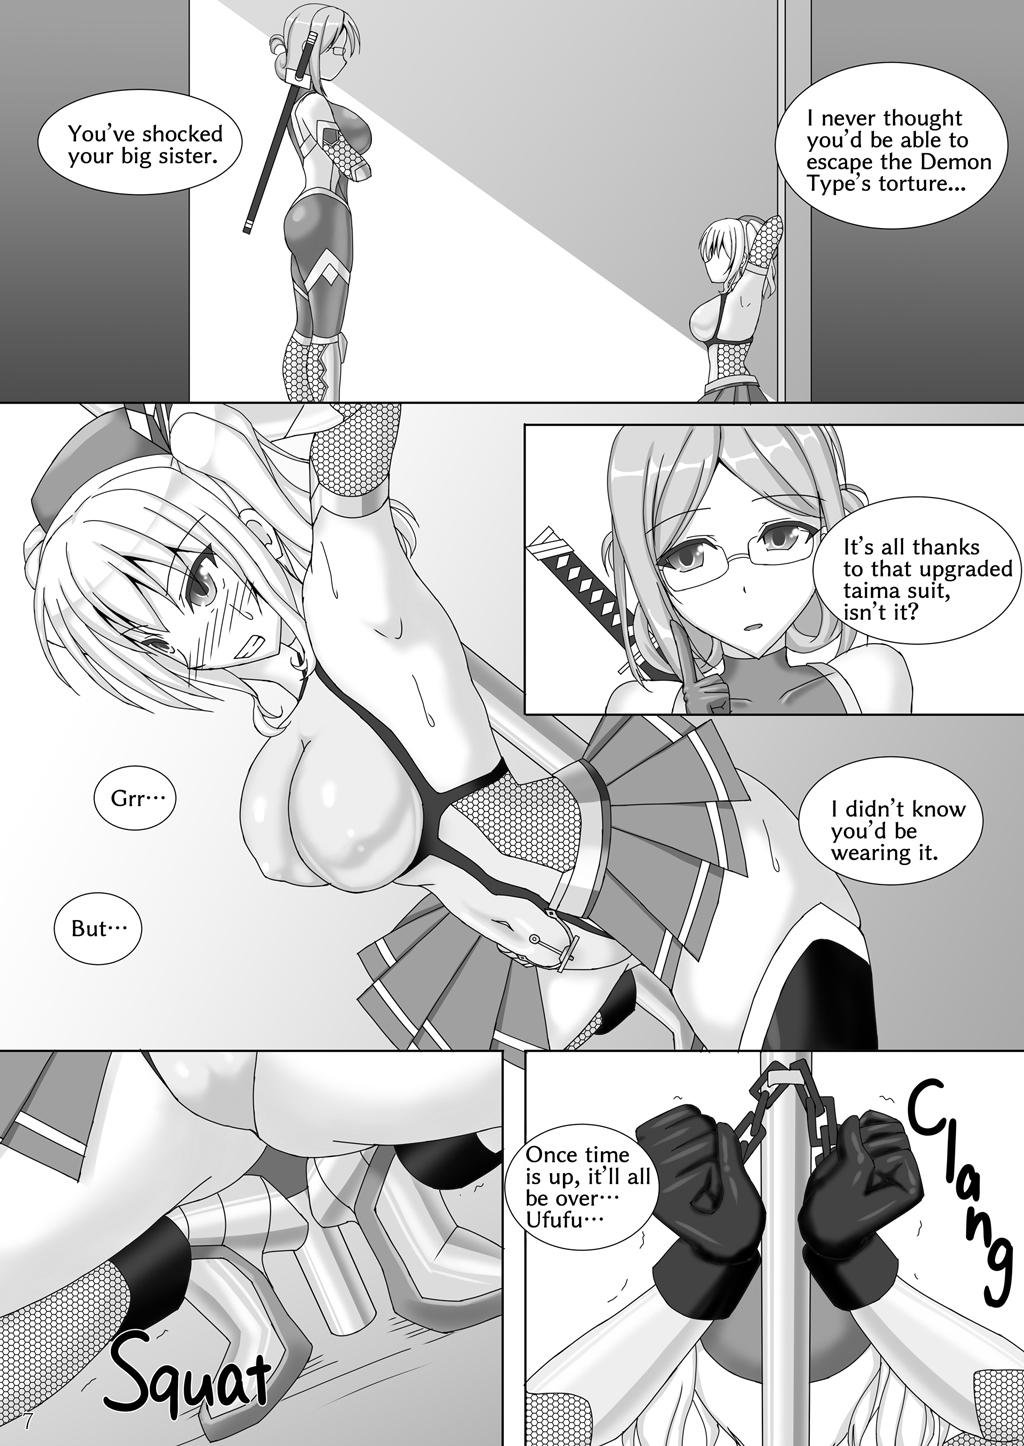 Sweet Taimakan Kashima Upgraded Suit Runs Wild - Kantai collection Femdom Clips - Page 8